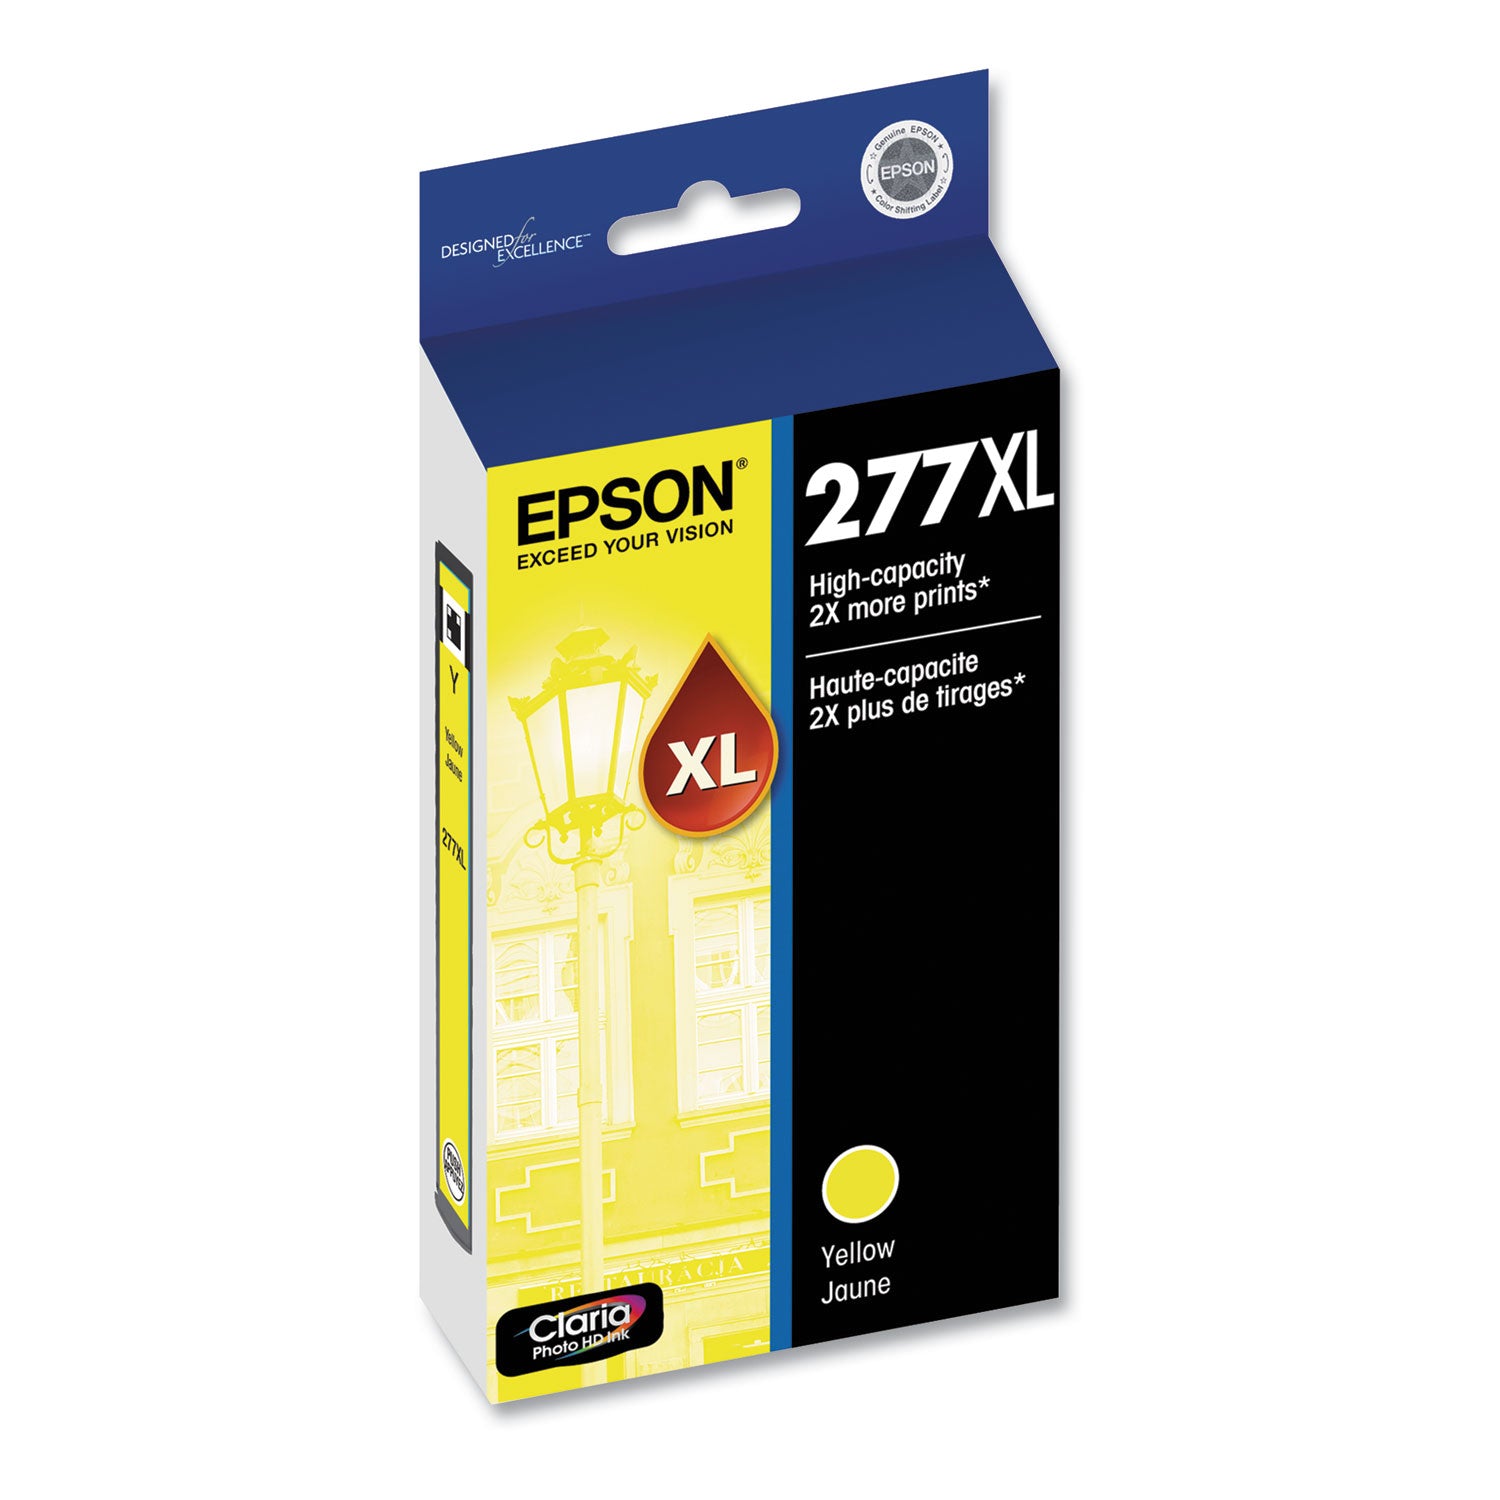 t277xl420-s-277xl-claria-high-yield-ink-740-page-yield-yellow_epst277xl420s - 2